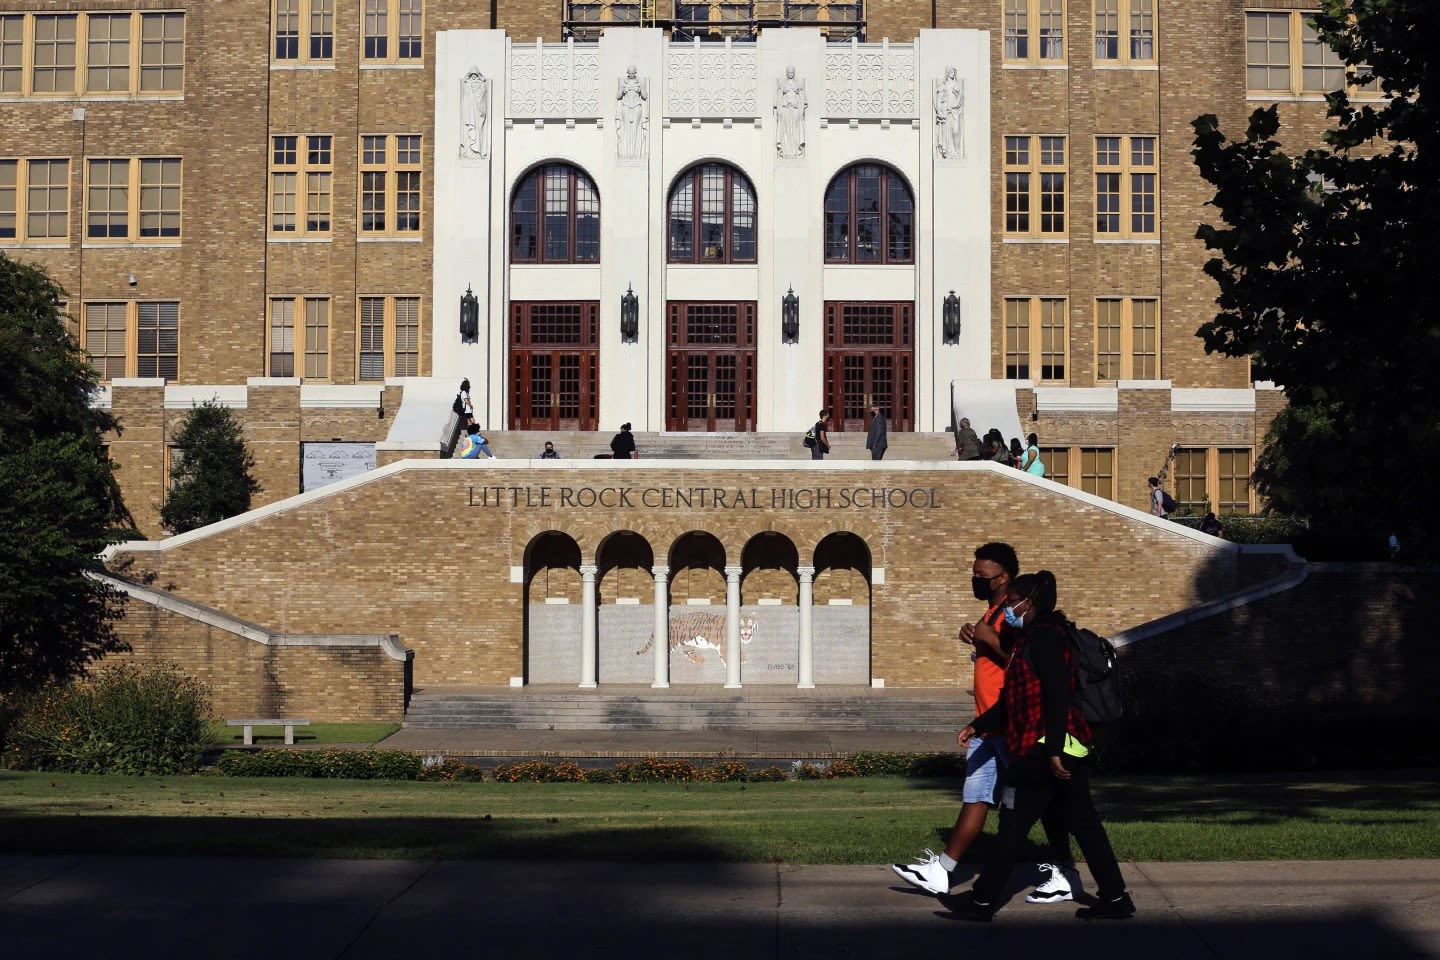 Judge rules Little Rock Central High School teachers can discuss critical race theory in classroom